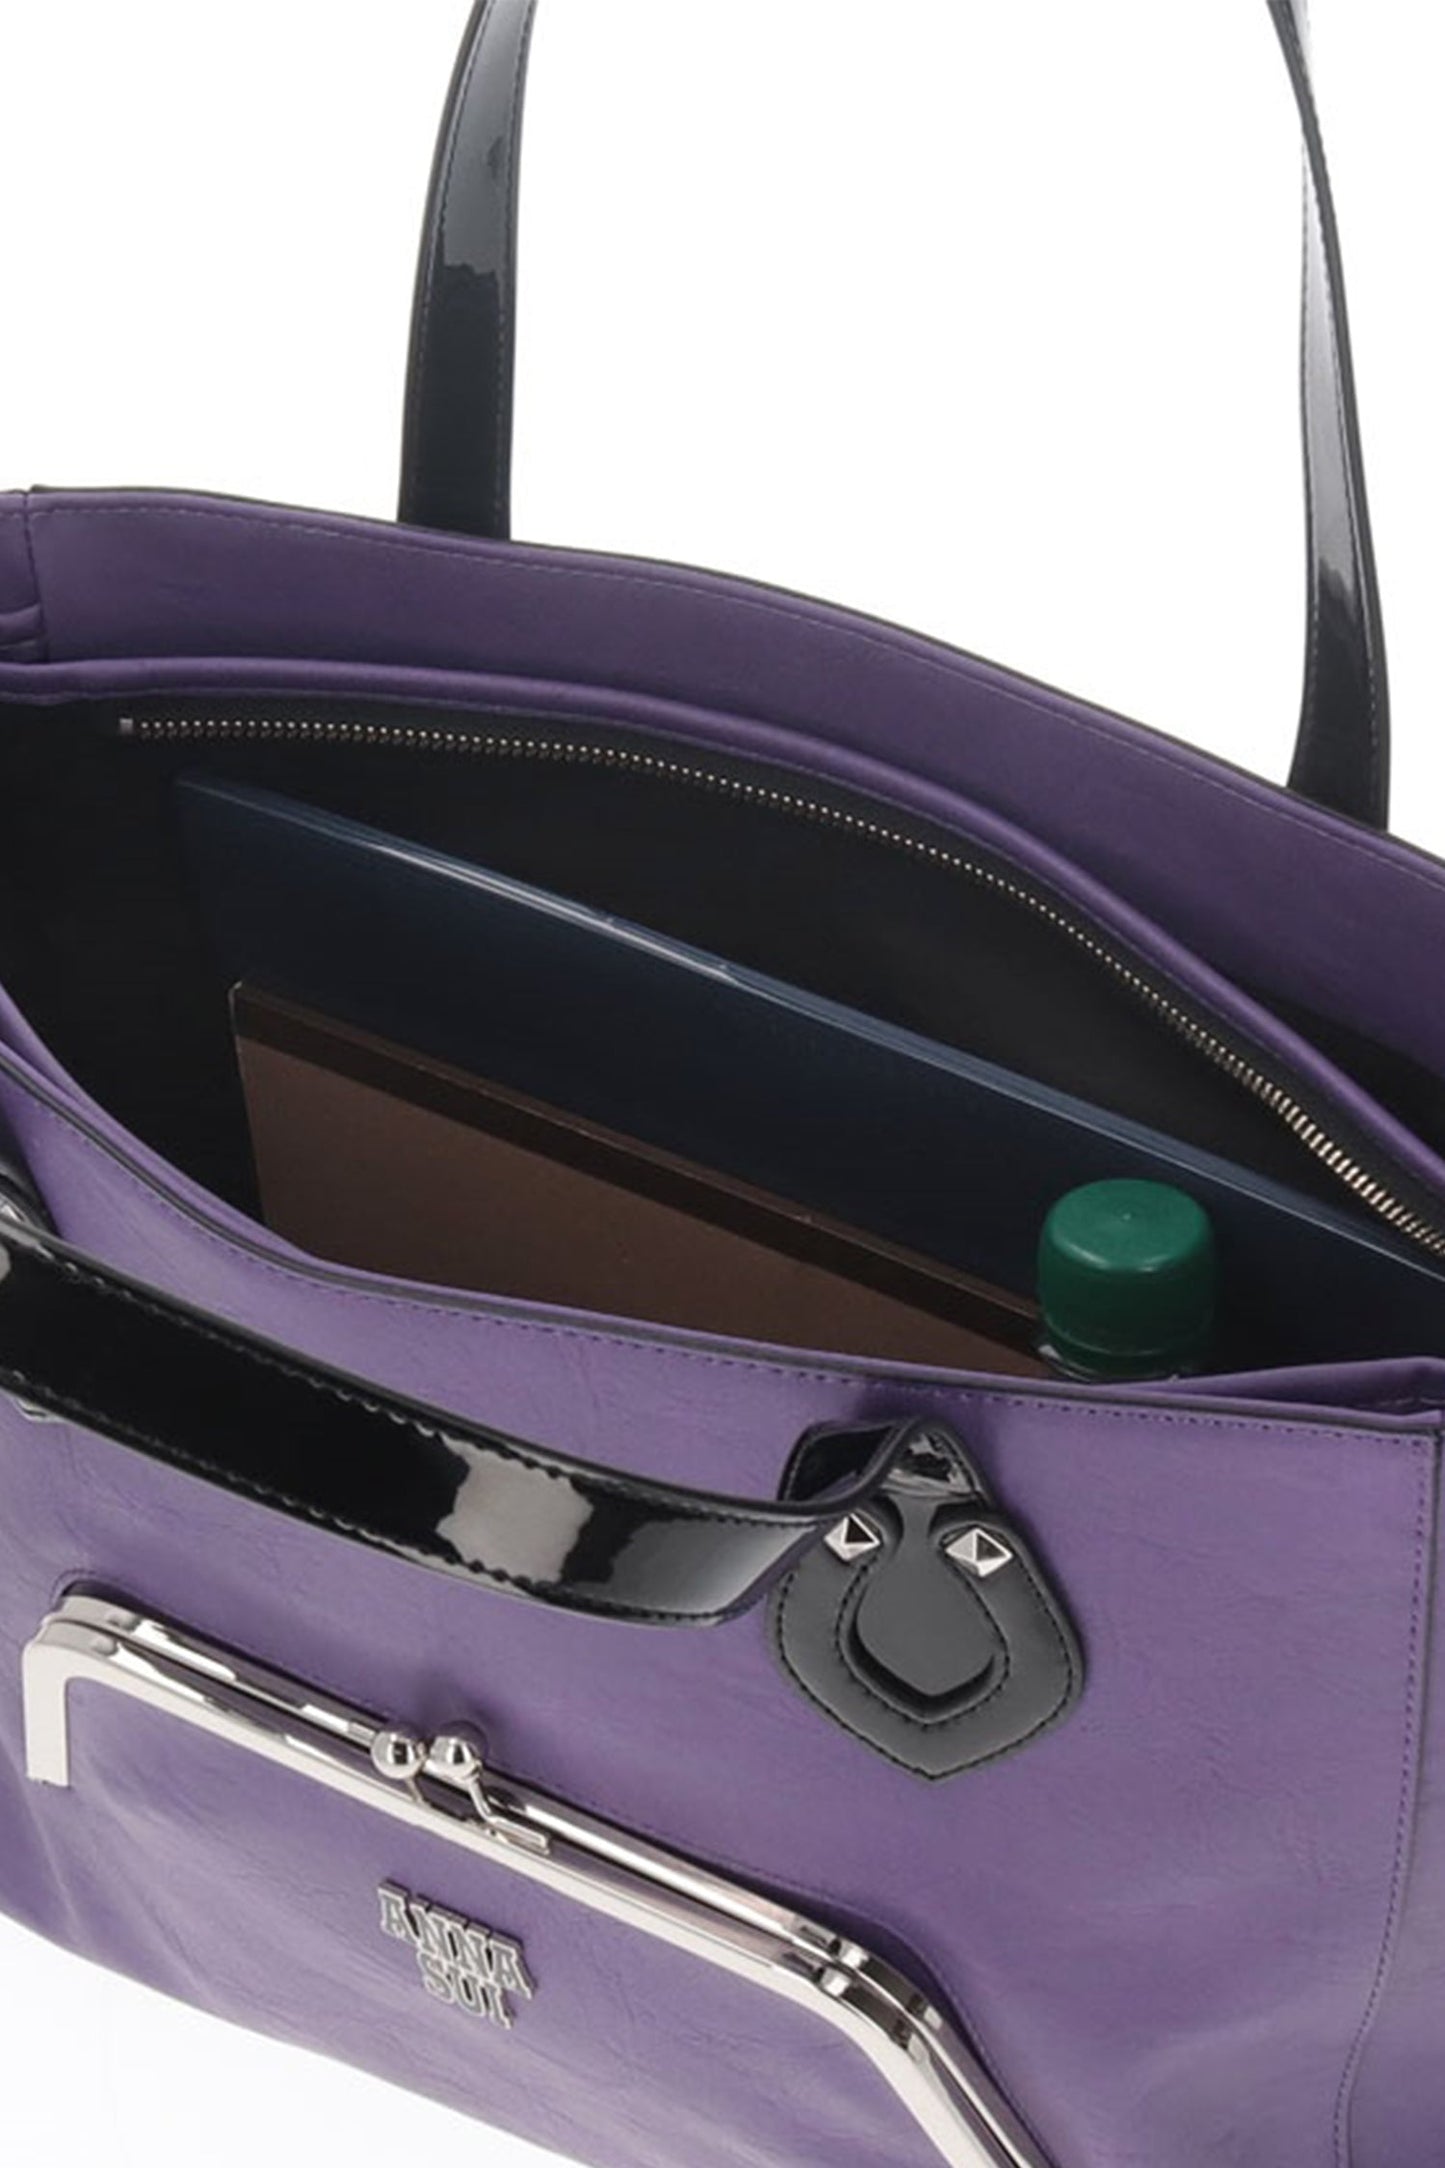 Metallica Large Tote Bag Purple zipper on top to close it, the handles are in a shiny black material